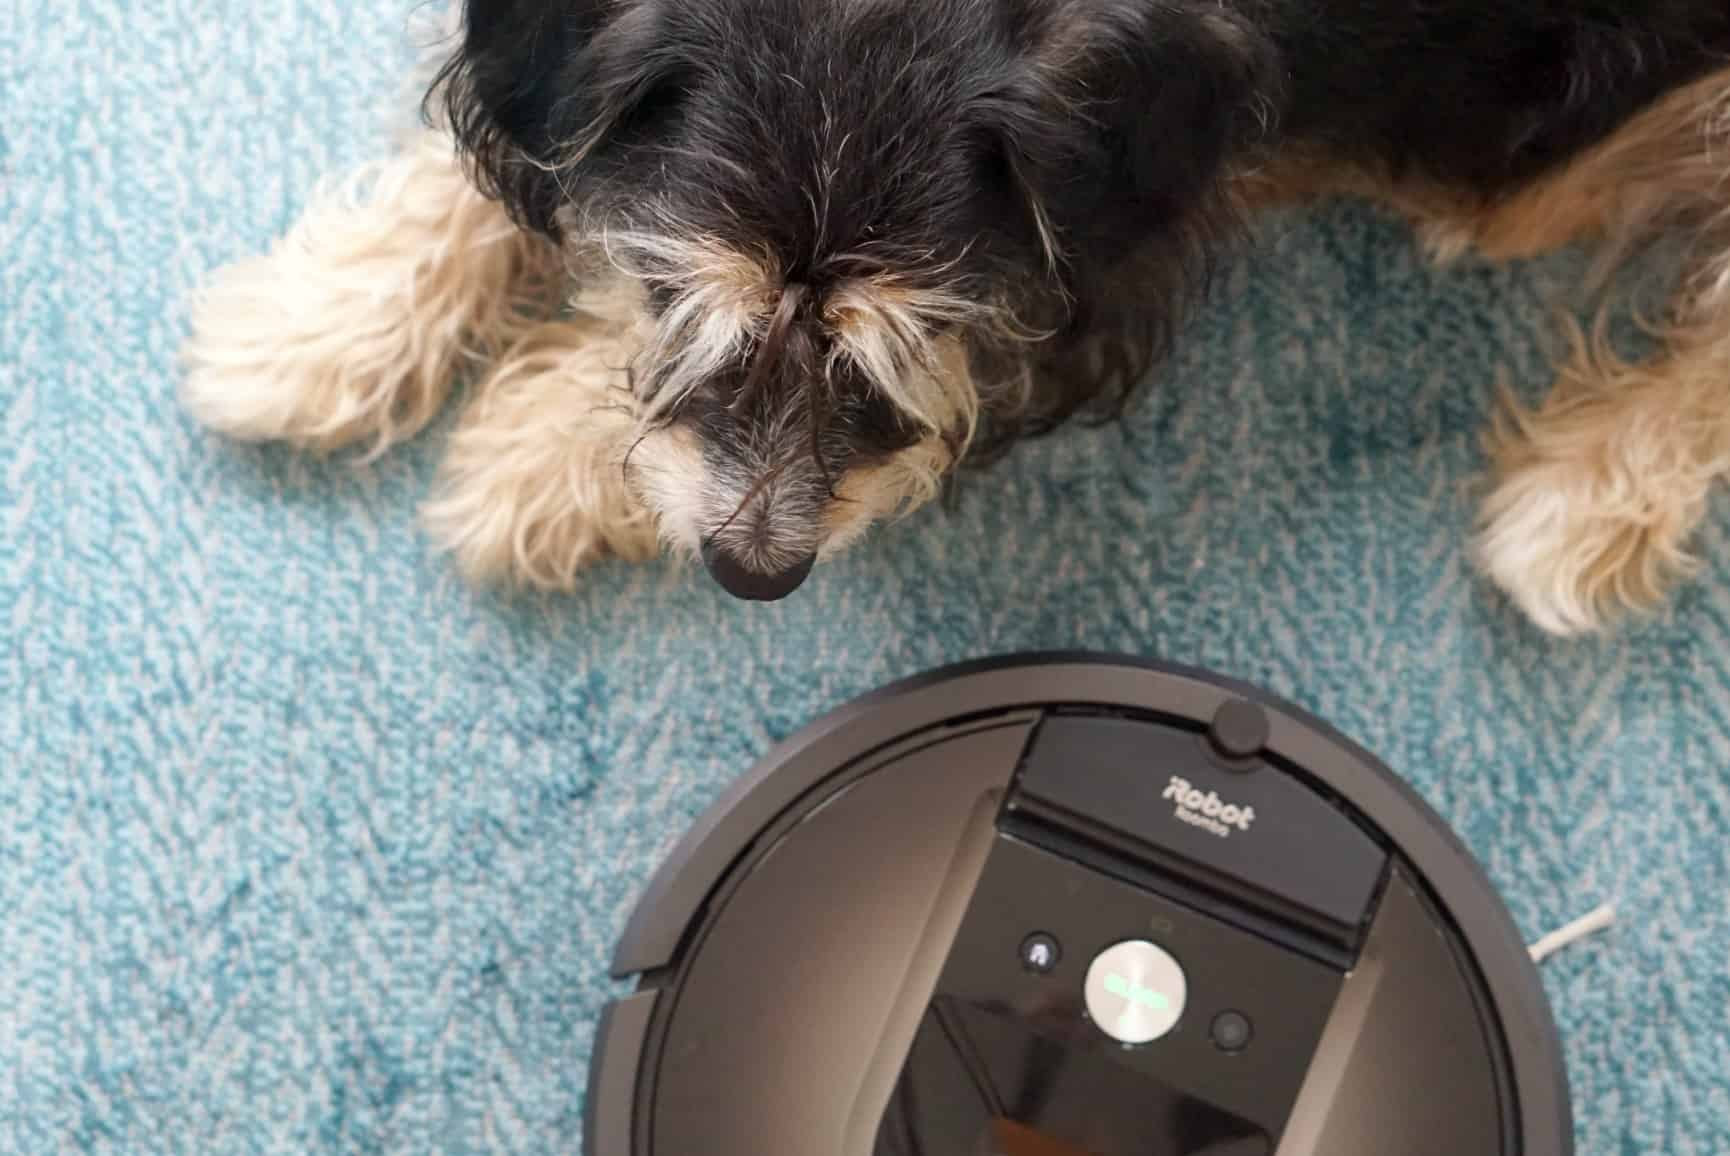 Review of the iRobot Roomba 980